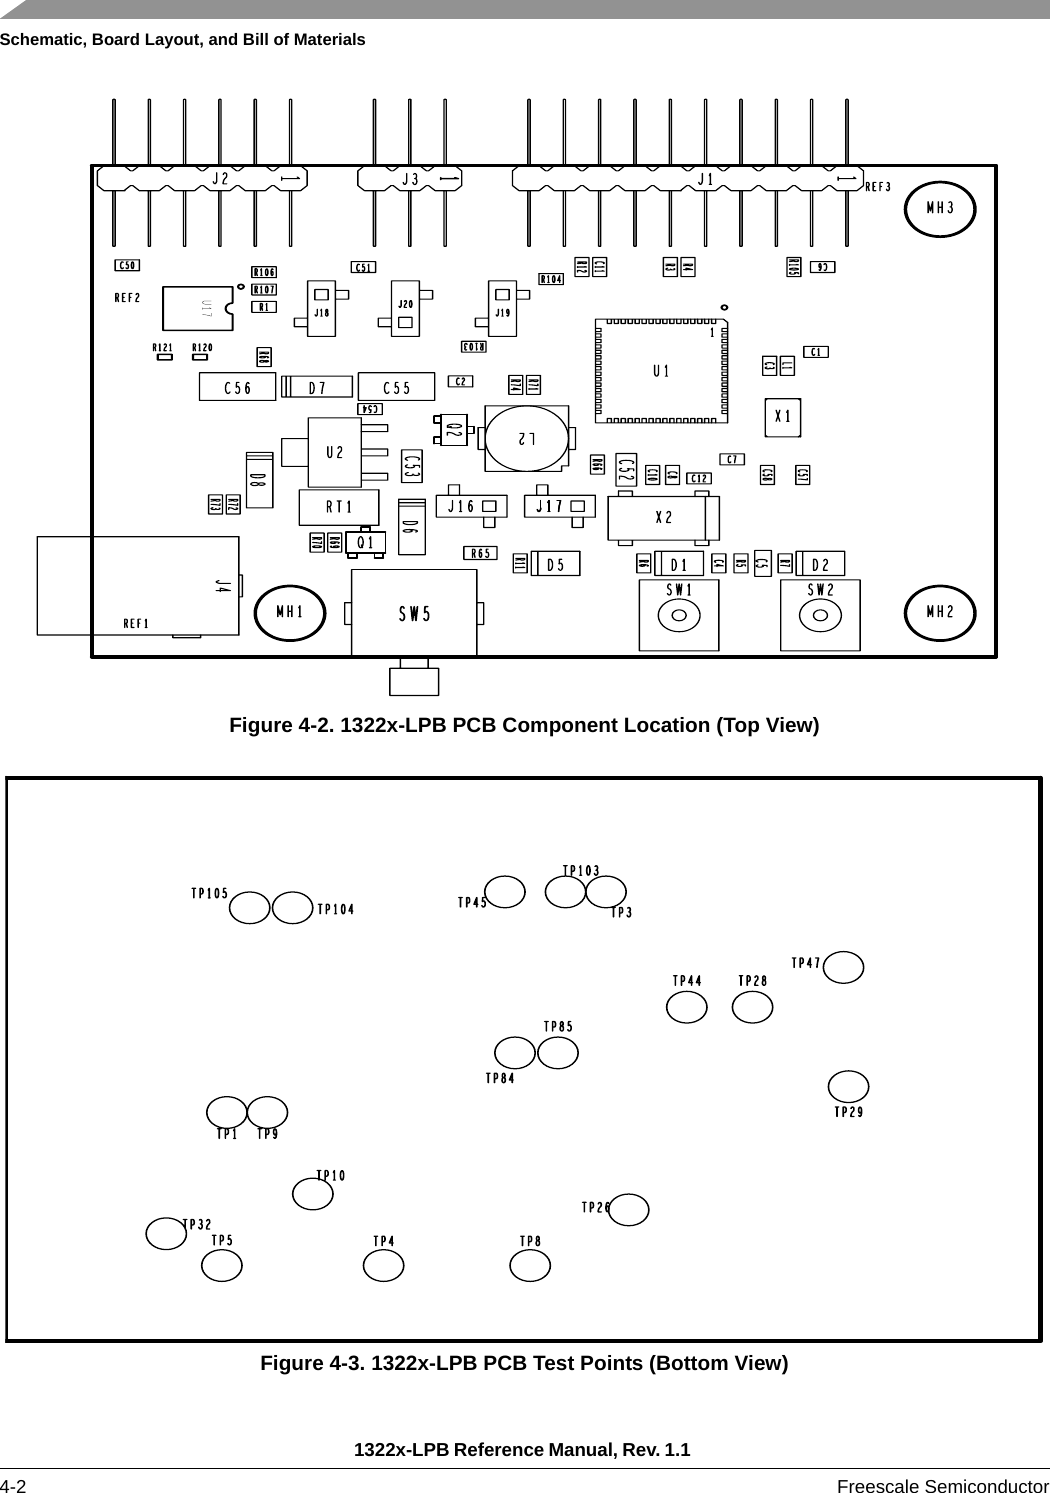 Schematic, Board Layout, and Bill of Materials1322x-LPB Reference Manual, Rev. 1.1 4-2 Freescale SemiconductorFigure 4-2. 1322x-LPB PCB Component Location (Top View)Figure 4-3. 1322x-LPB PCB Test Points (Bottom View)